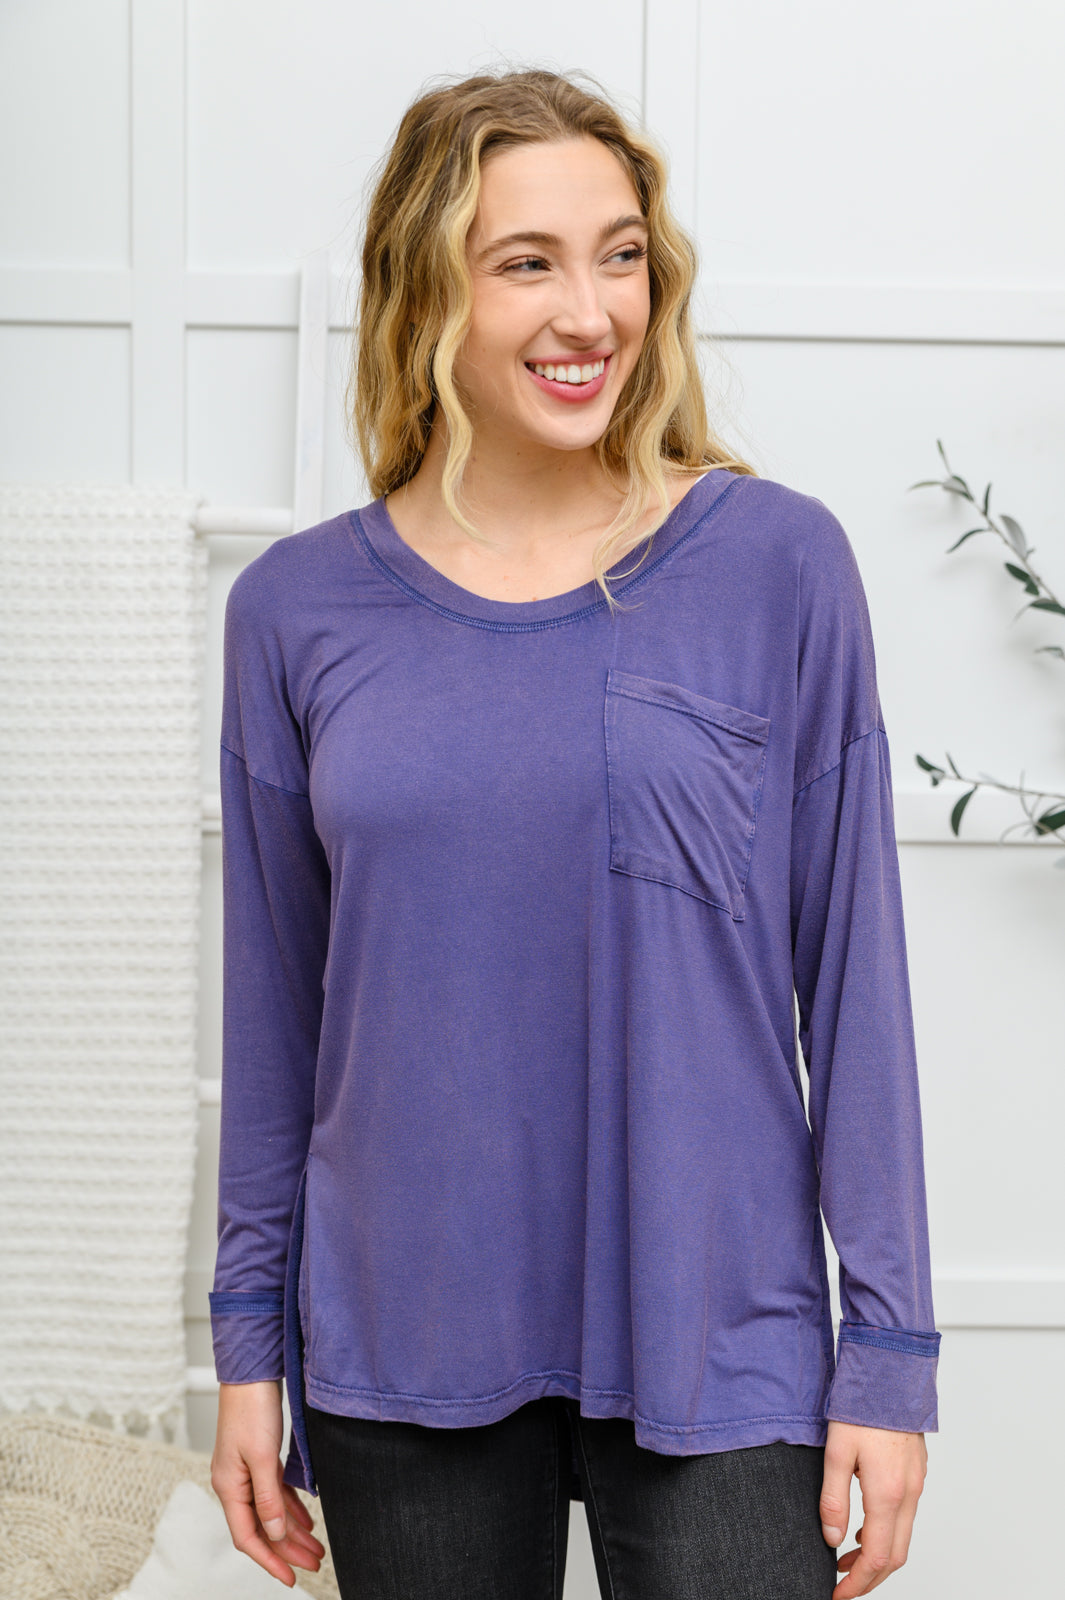 The Long Sleeve Knit Top With Pocket In Denim Blue features a lightweight, stretchy fabric that shapes a round neckline with long sleeves, and a hi-low hem with side slit